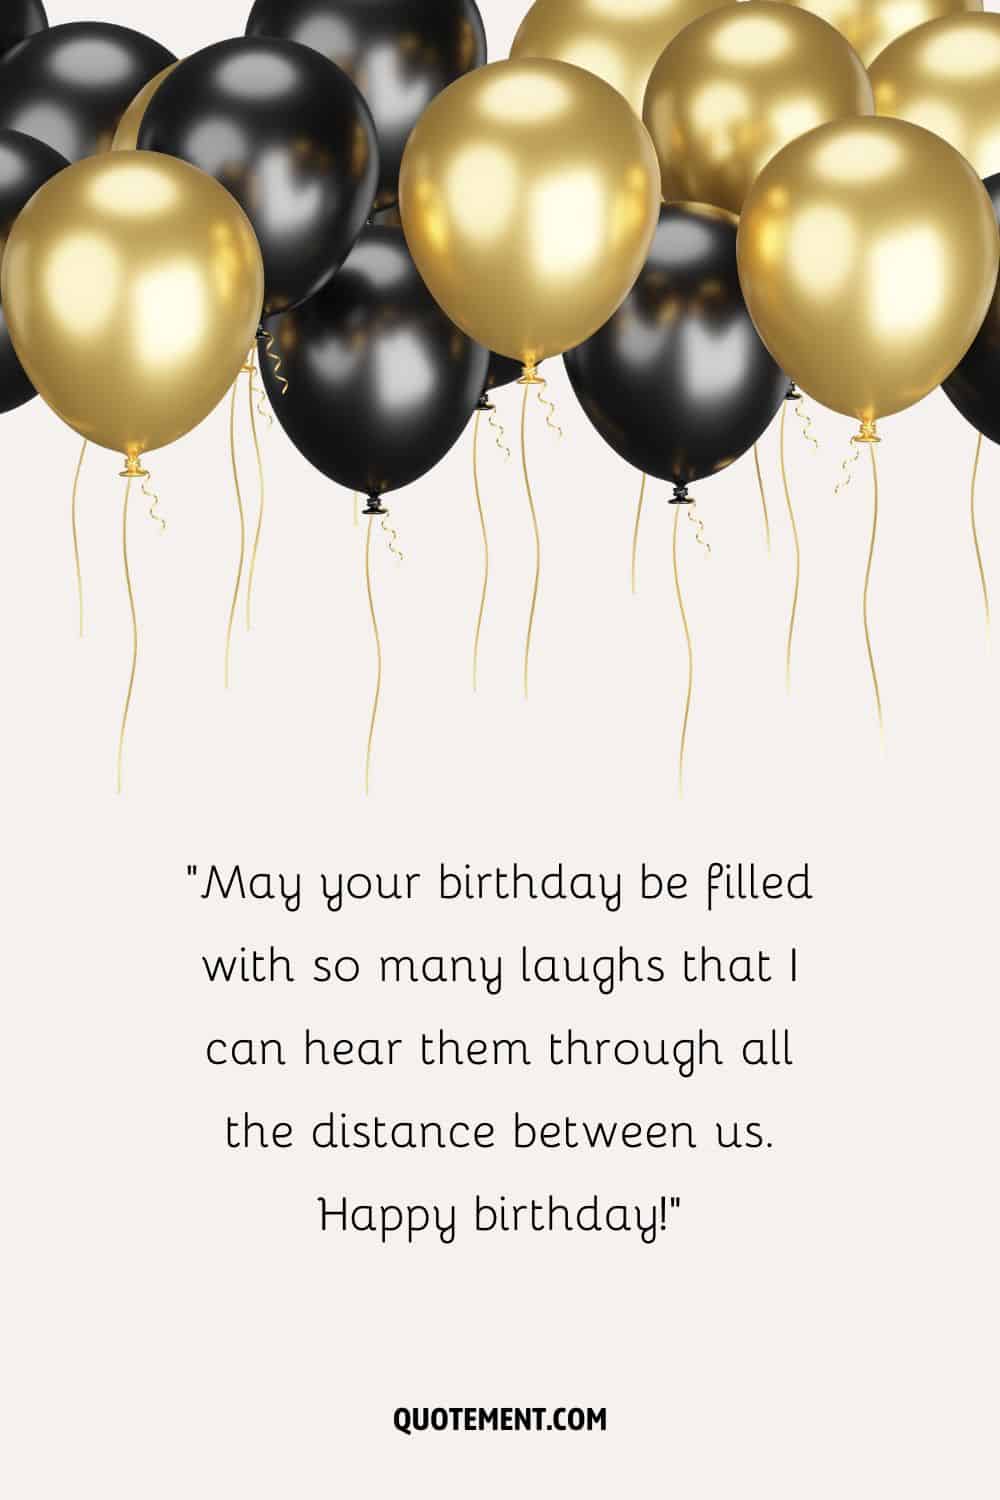 black and gold balloons representing a 68th birthday wish
